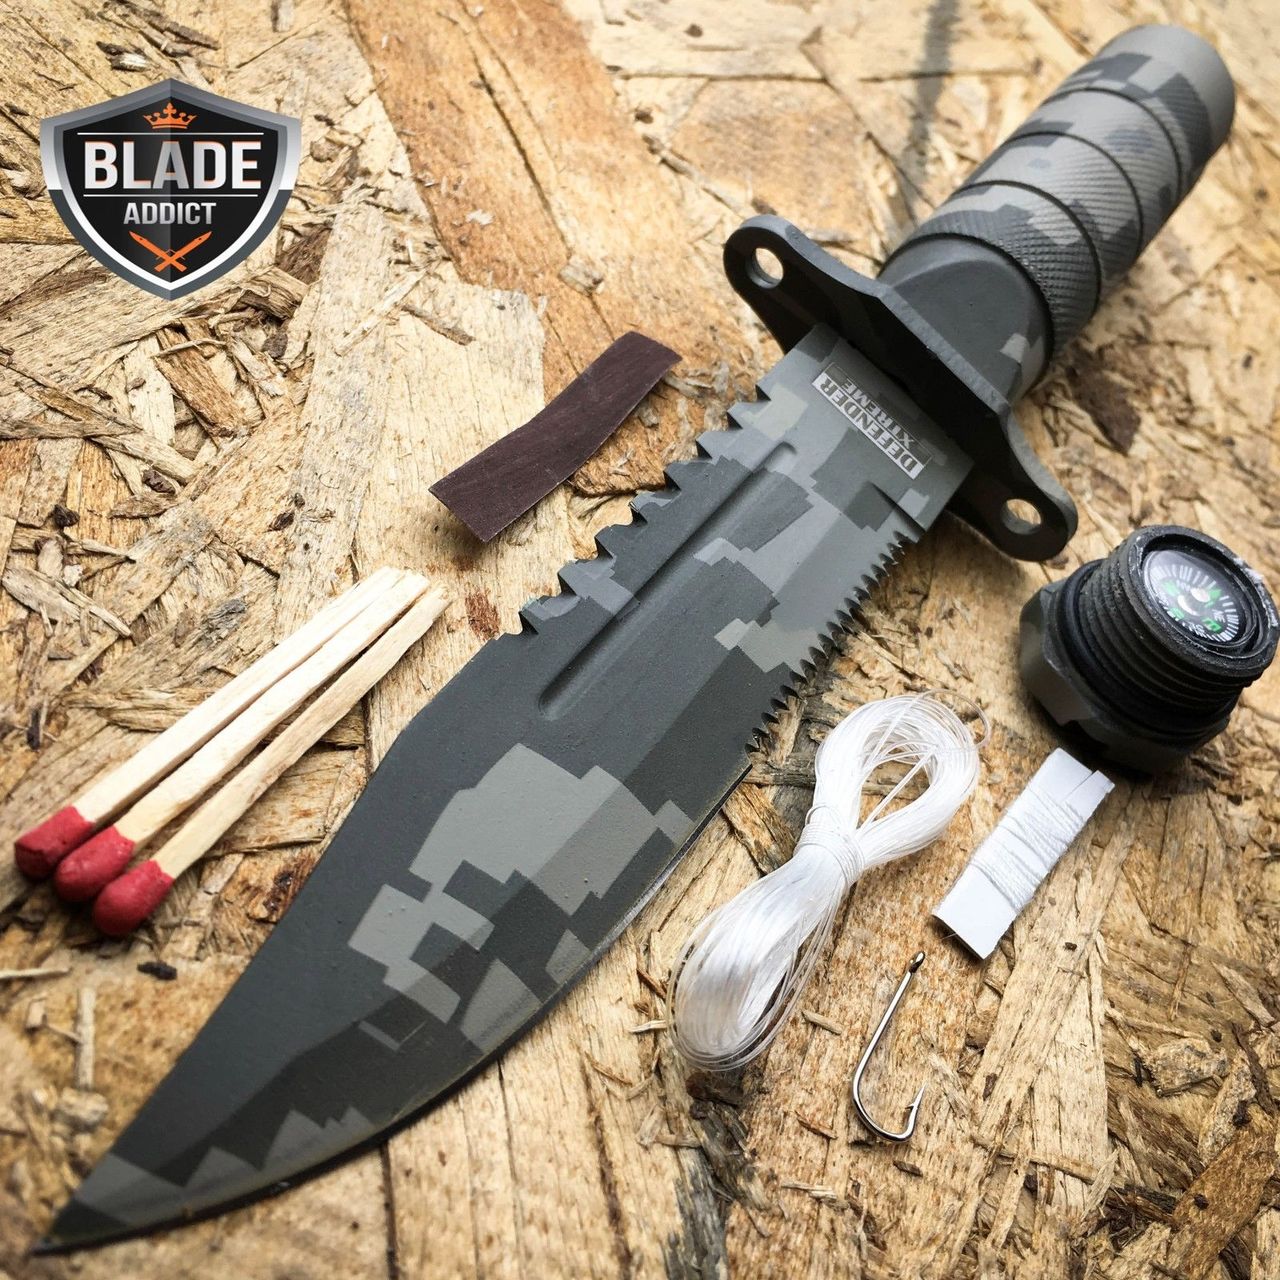 8.5 Military Camo Tactical Fishing Hunting Knife Survival Kit Blade w